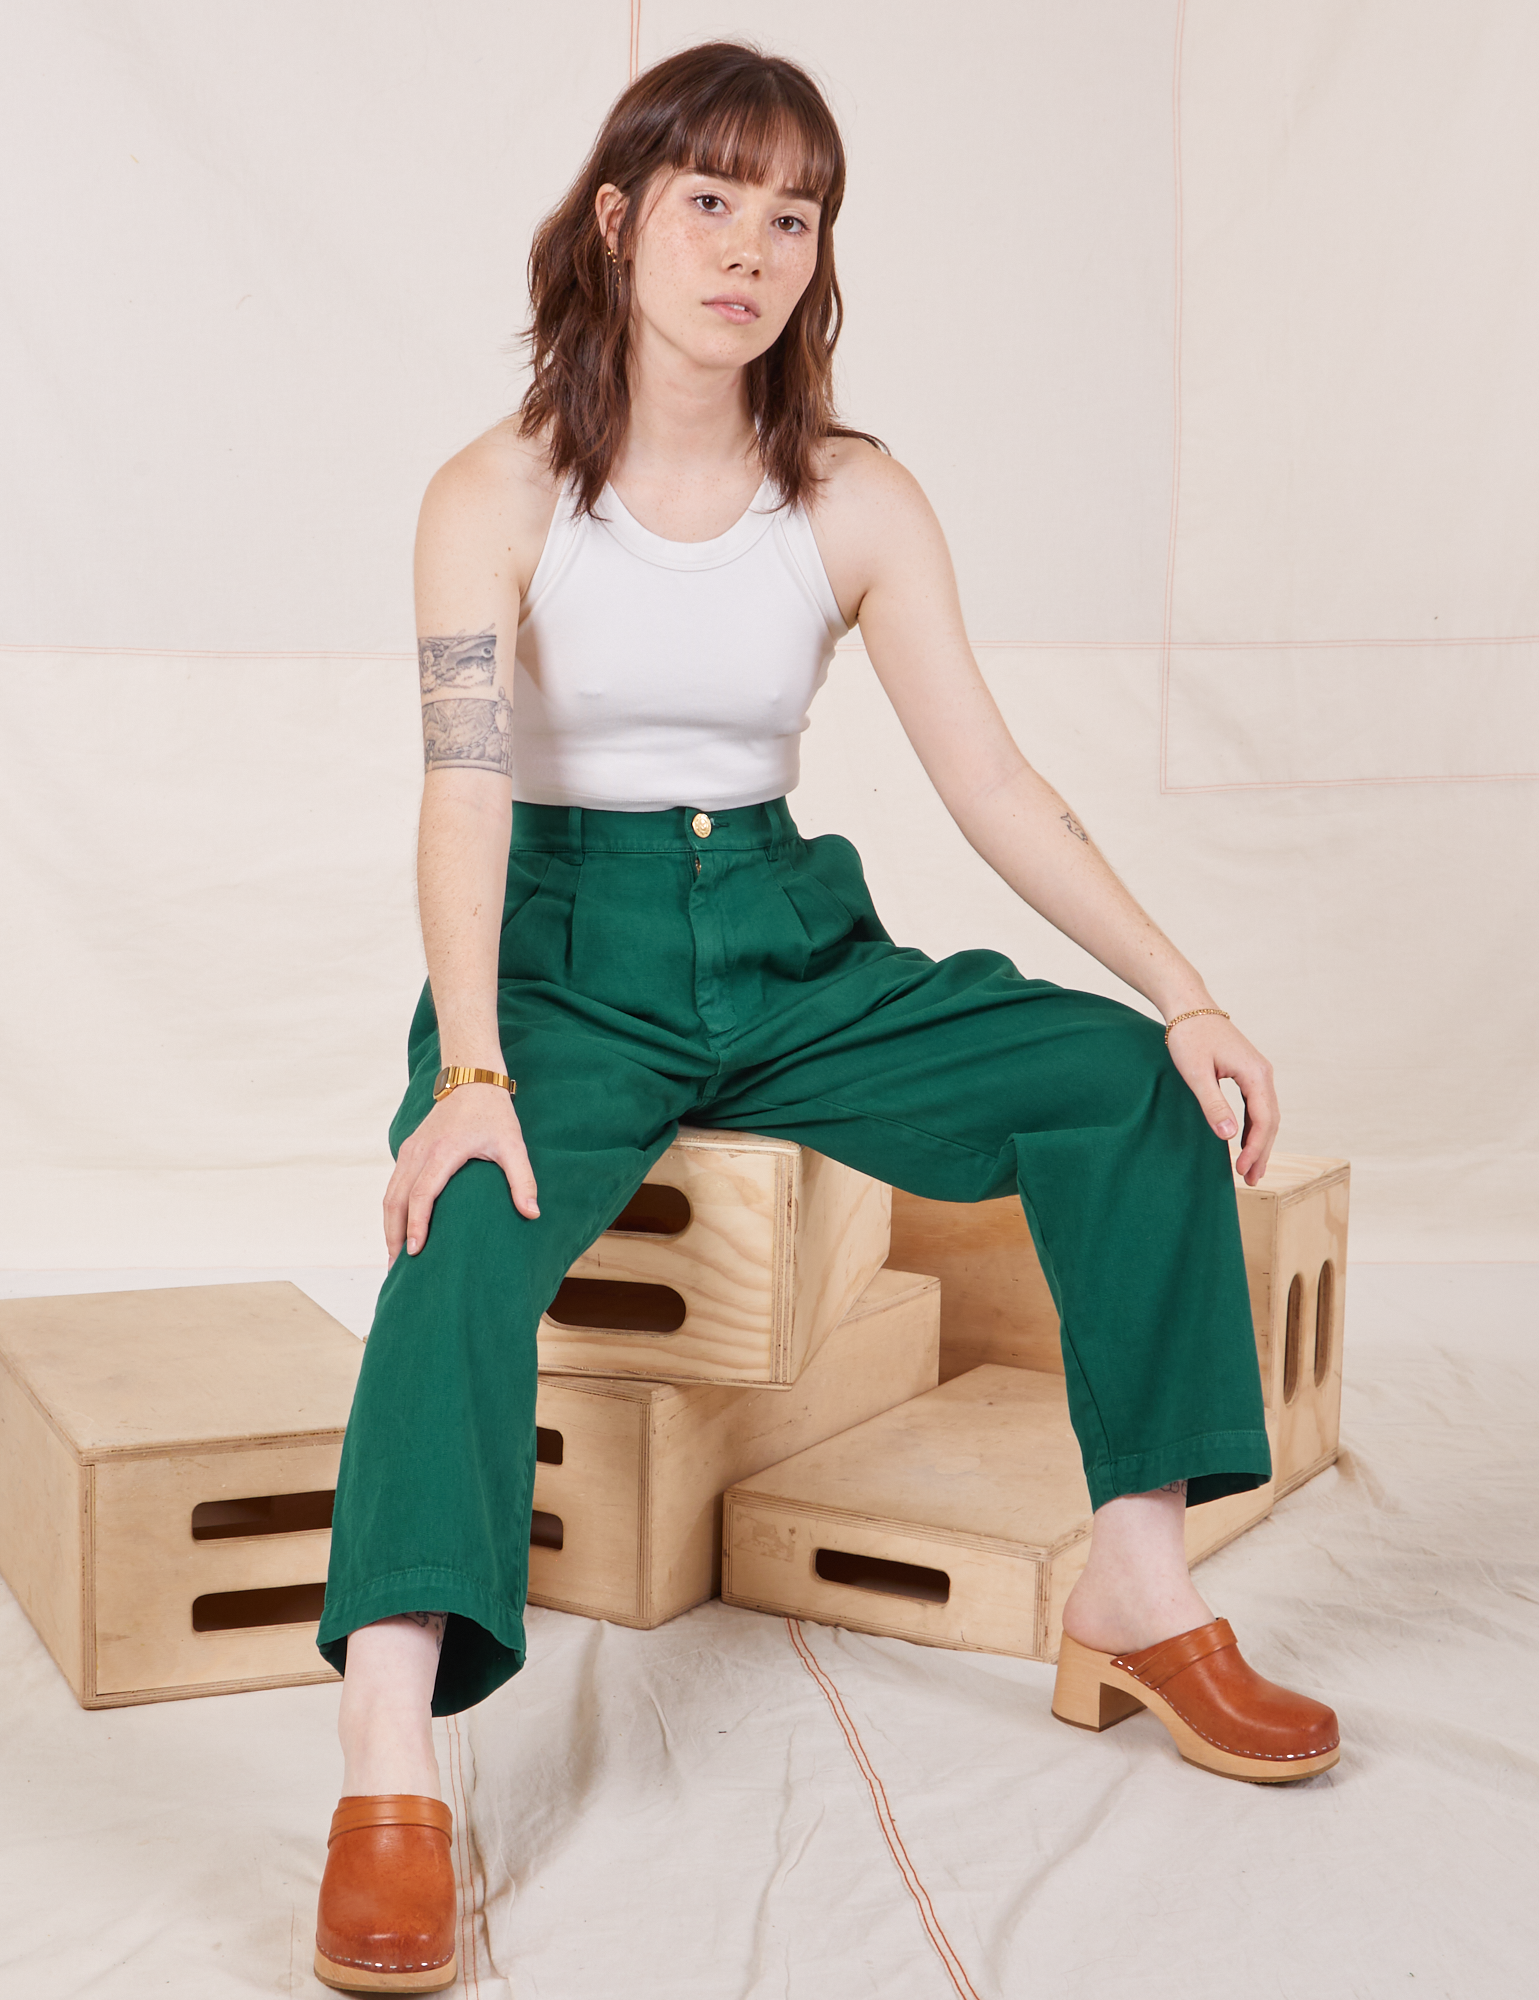 Hana is wearing Heavyweight Trousers in Hunter Green and vintage off-white Halter Top